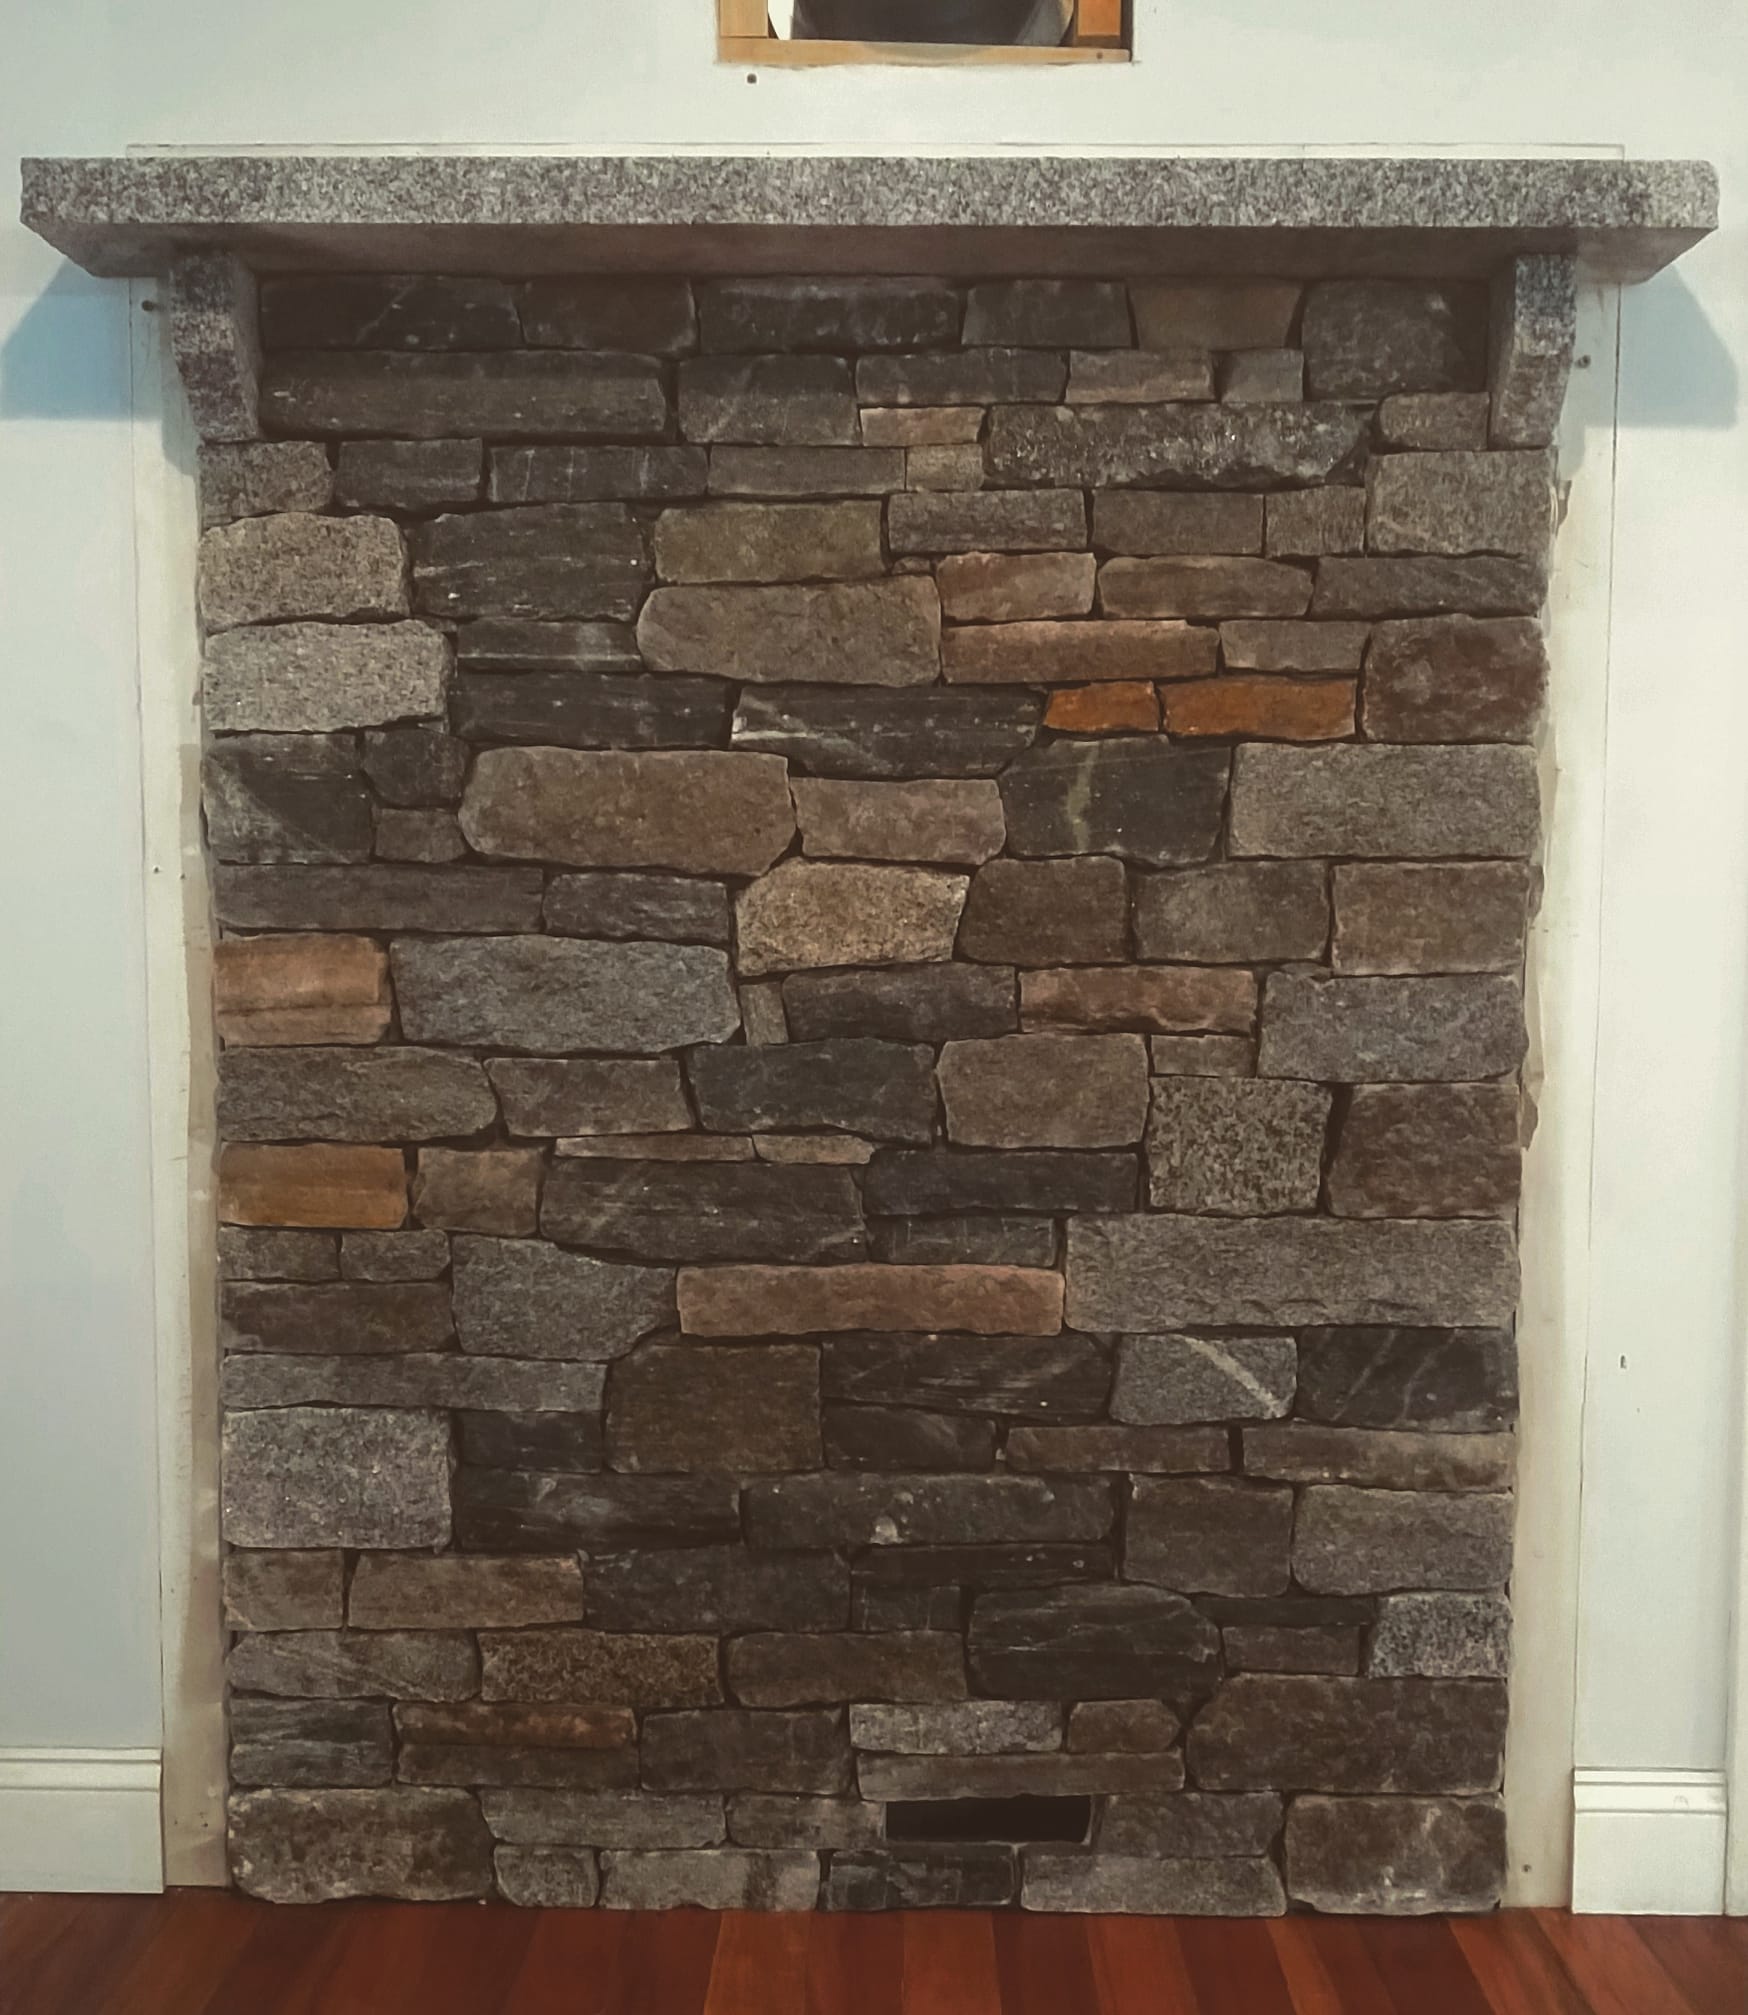 Warm and cozy is this New England style heat shield for small wood stove. The mantle was hand-split and notched from a Woodbury granite tread.